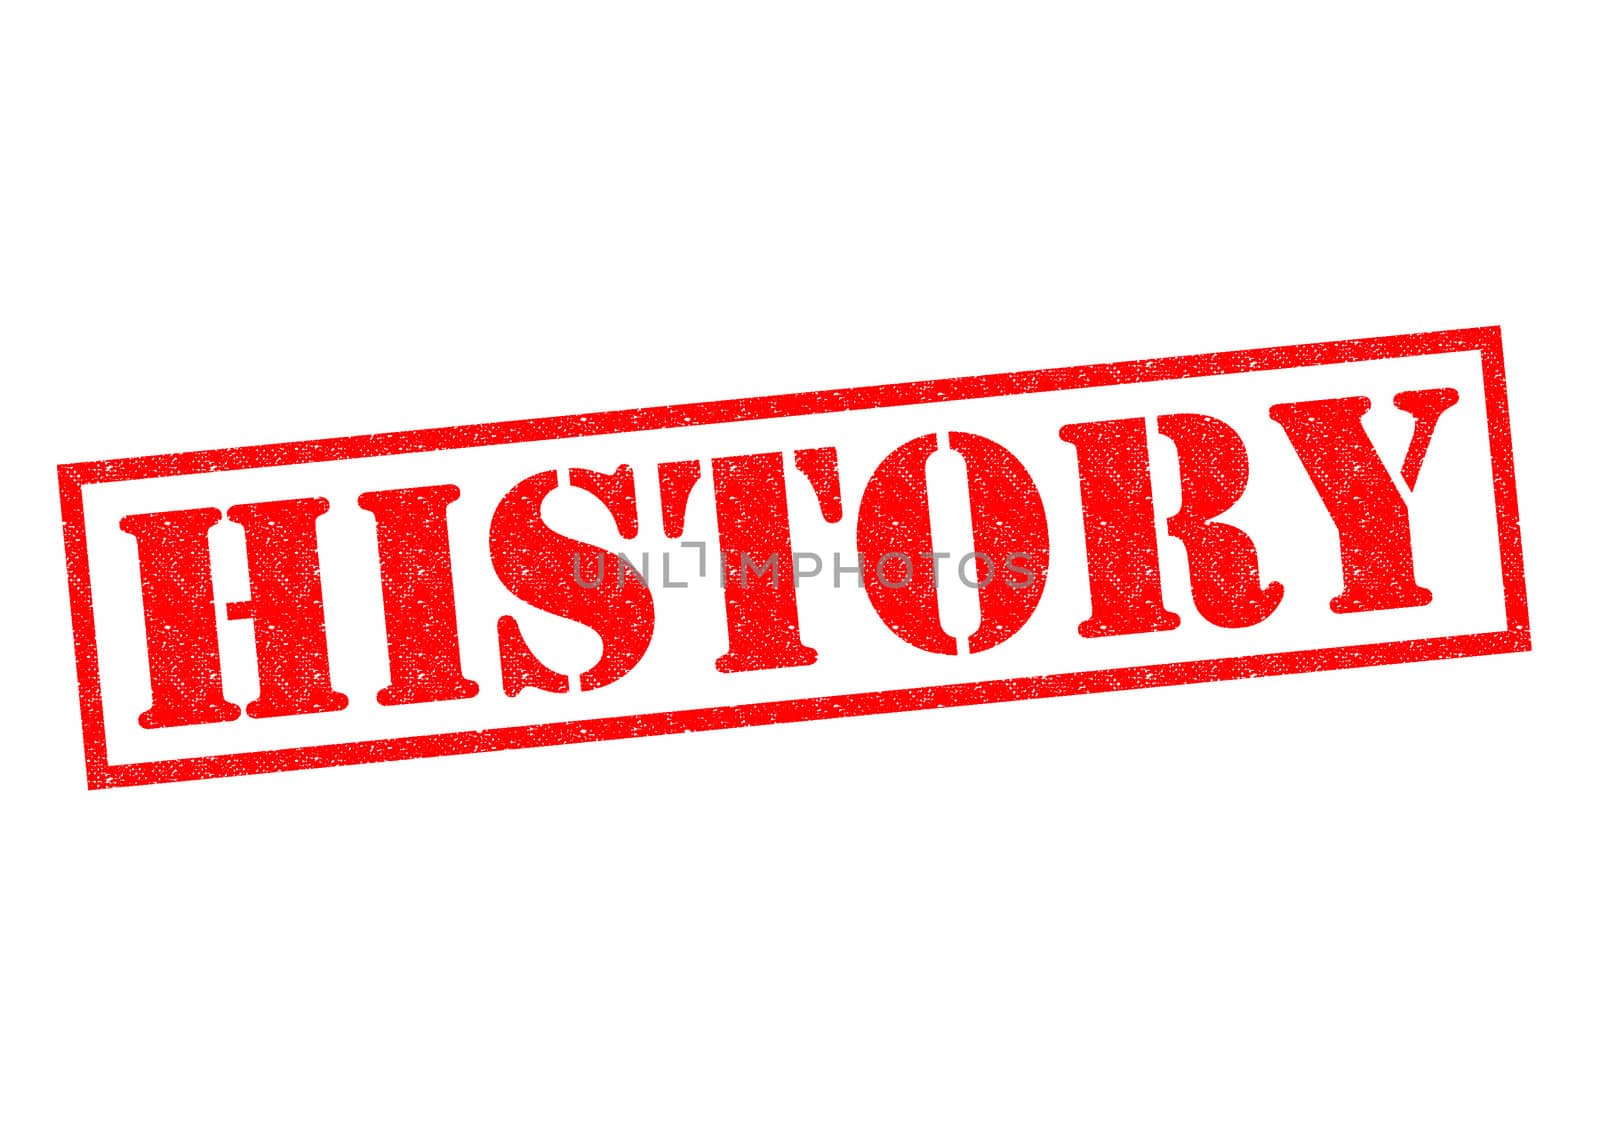 HISTORY red Rubber Stamp over a white background.